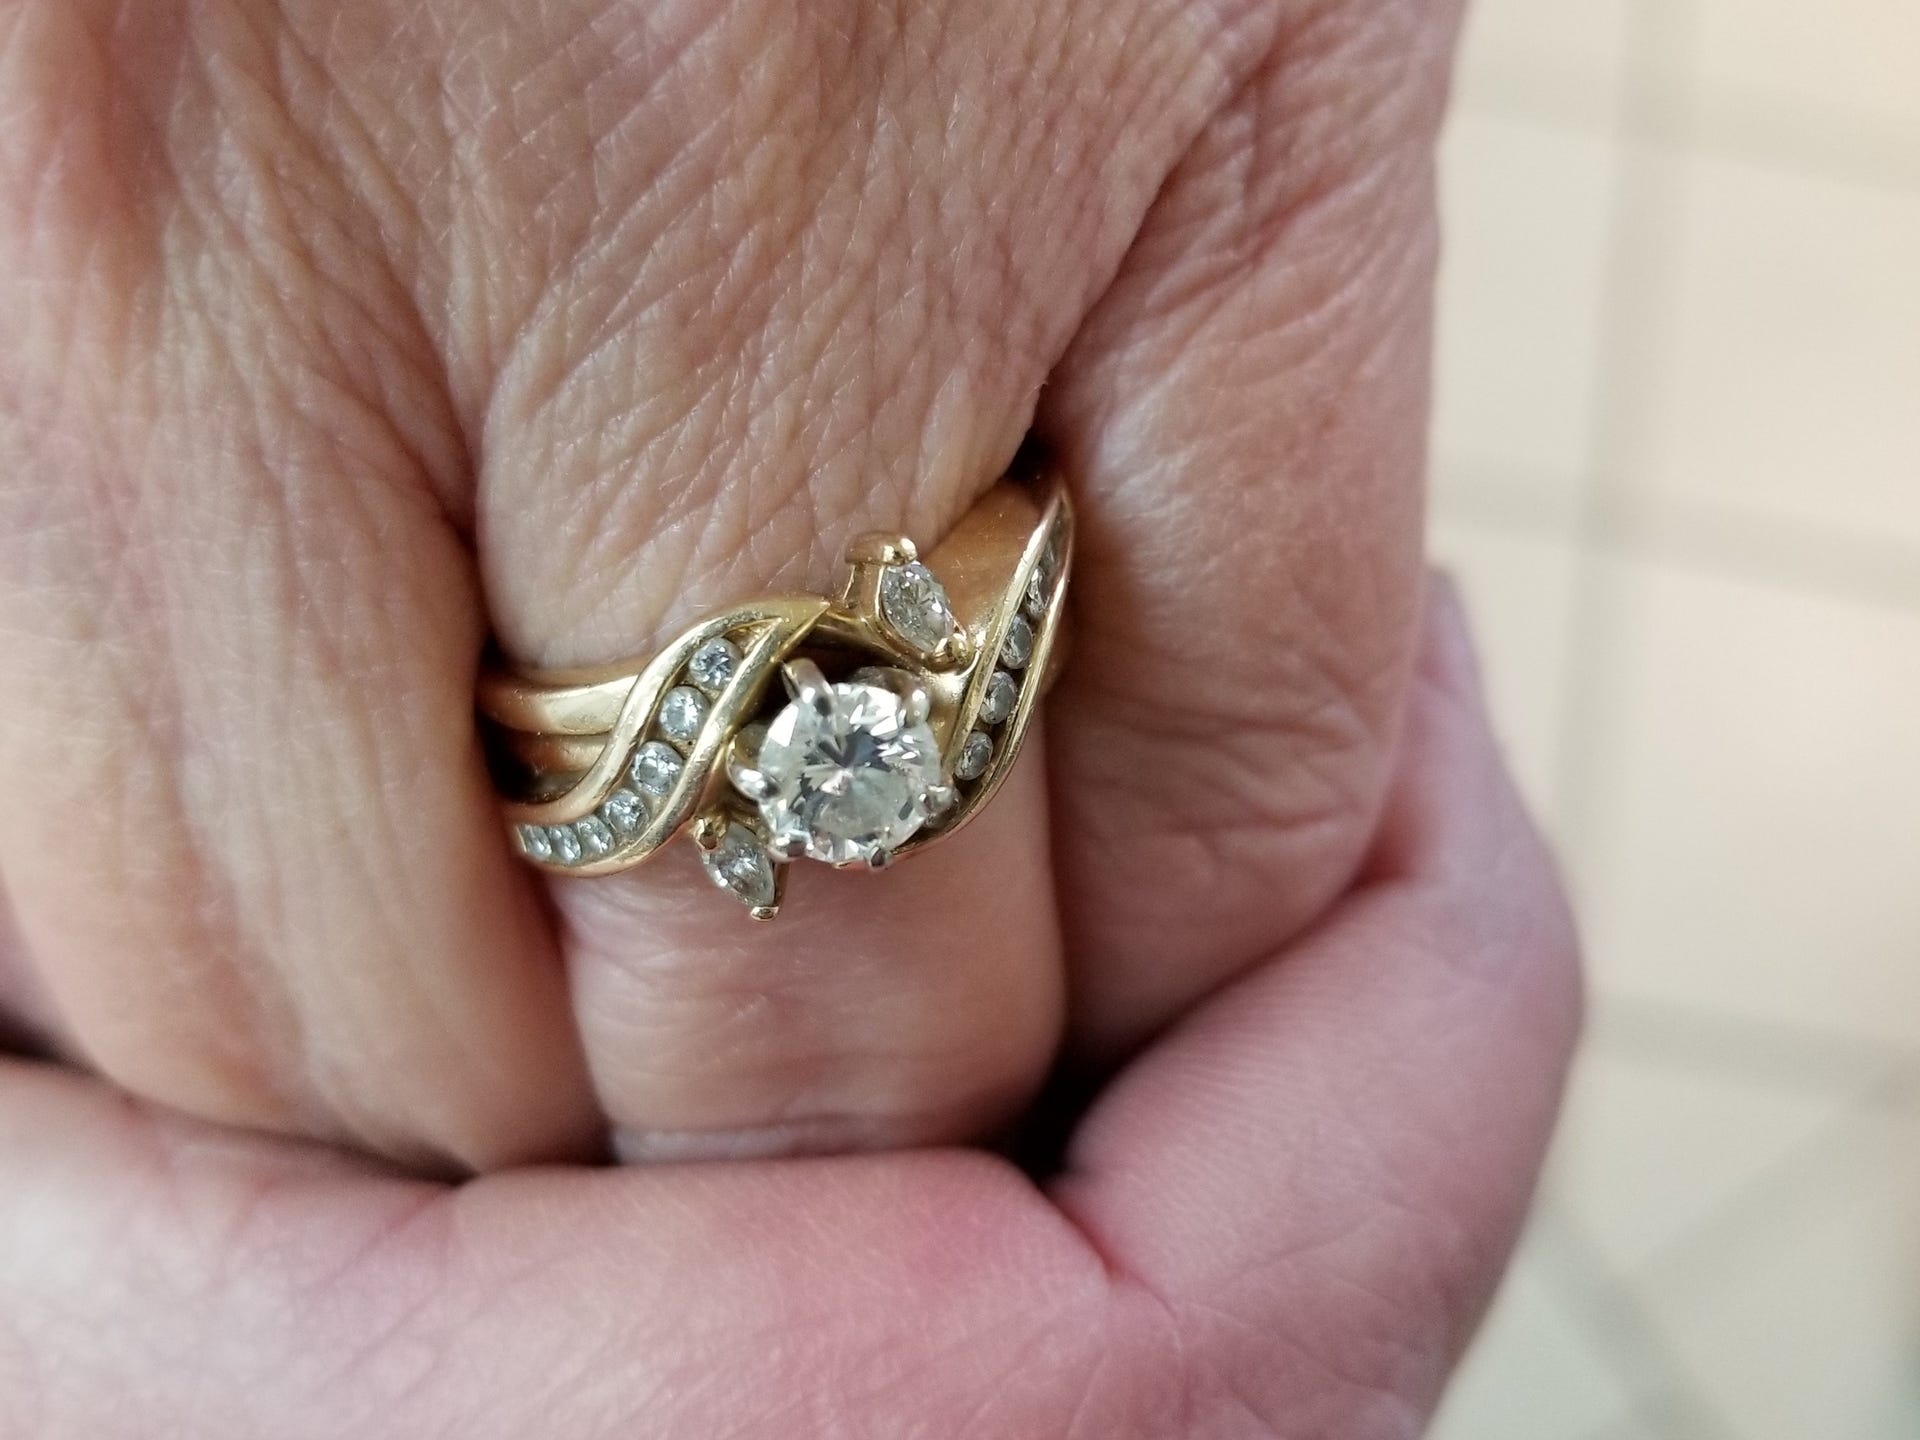 woman loses wedding ring in a bag of popcorn